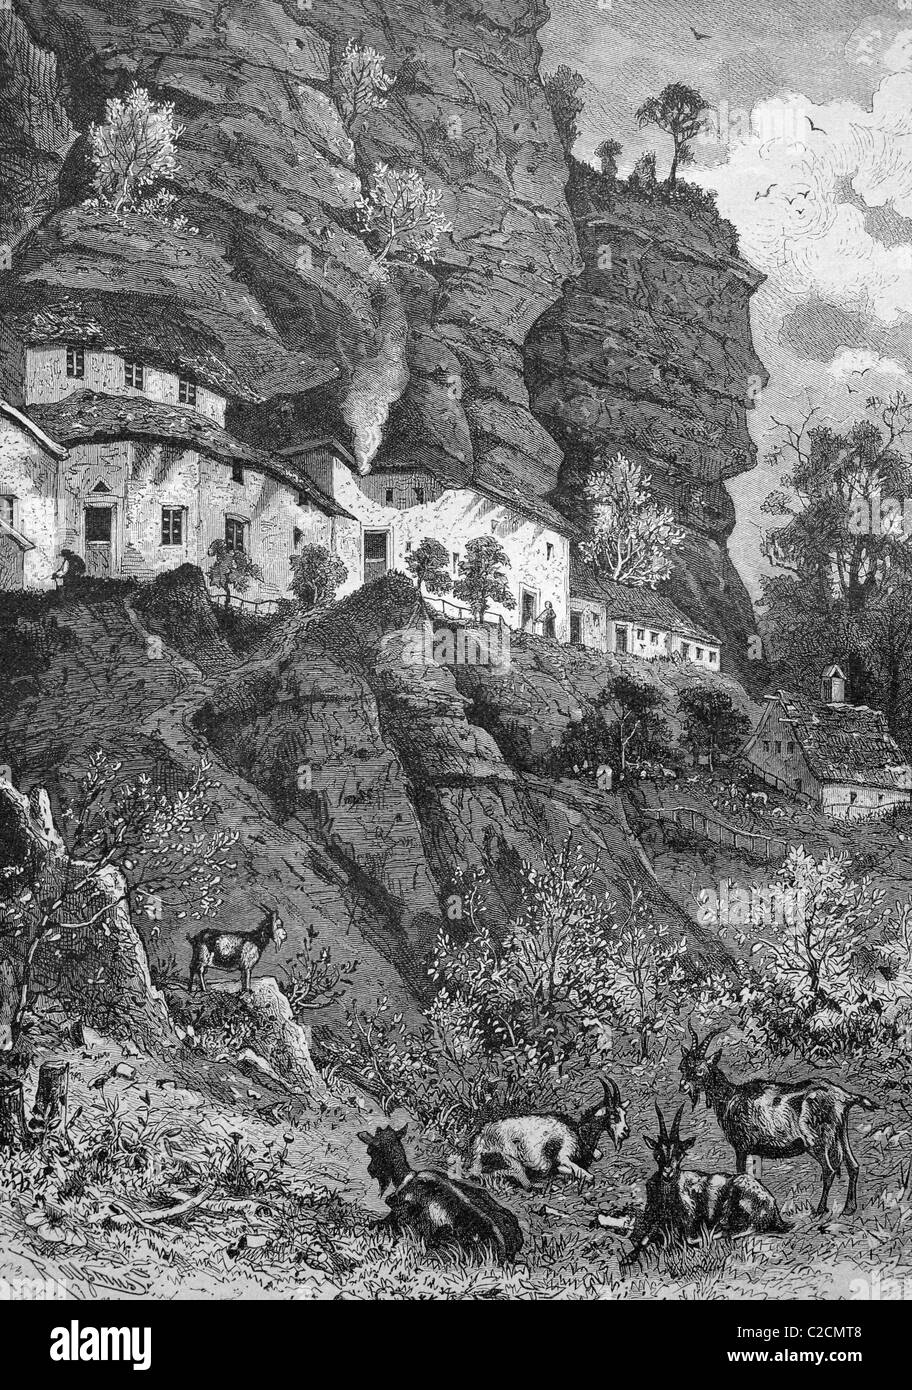 Cliff dwellings in the Trausthal valley, Alsace-Lorraine, historical illustration circa 1893 Stock Photo